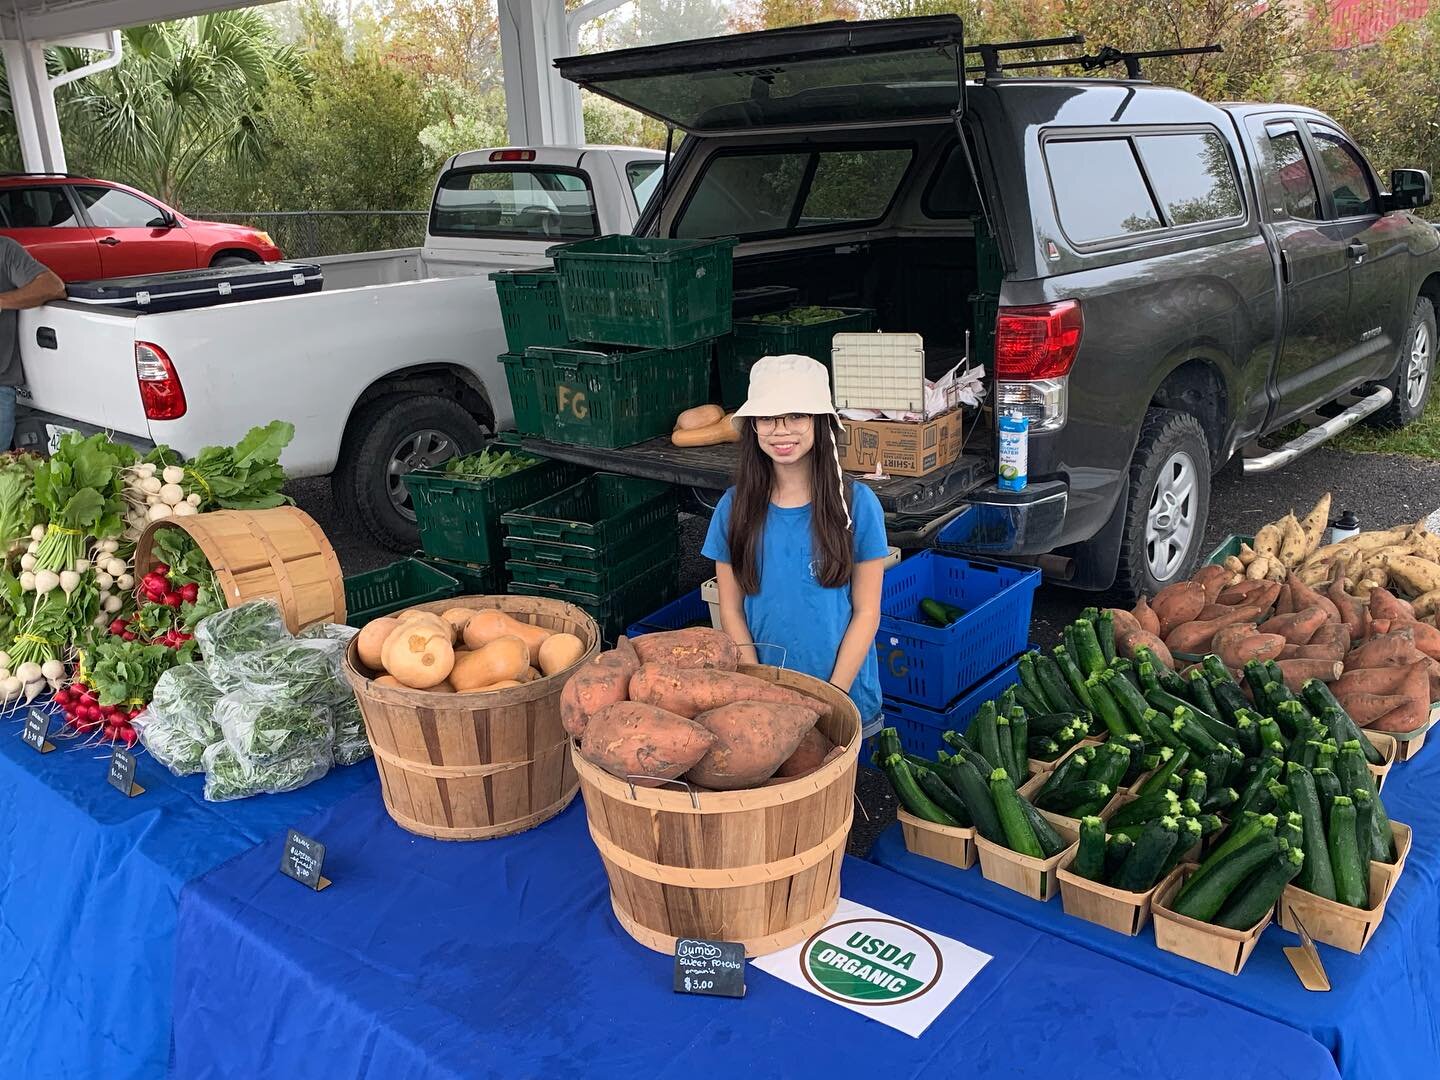 Abigail and I are back at @alachuacountyfarmersmarket today and should be off to the start of a good season. I haven&rsquo;t been very active on media for a while. Hopefully ext week I&rsquo;ll give a proper update. Thanks y&rsquo;all.